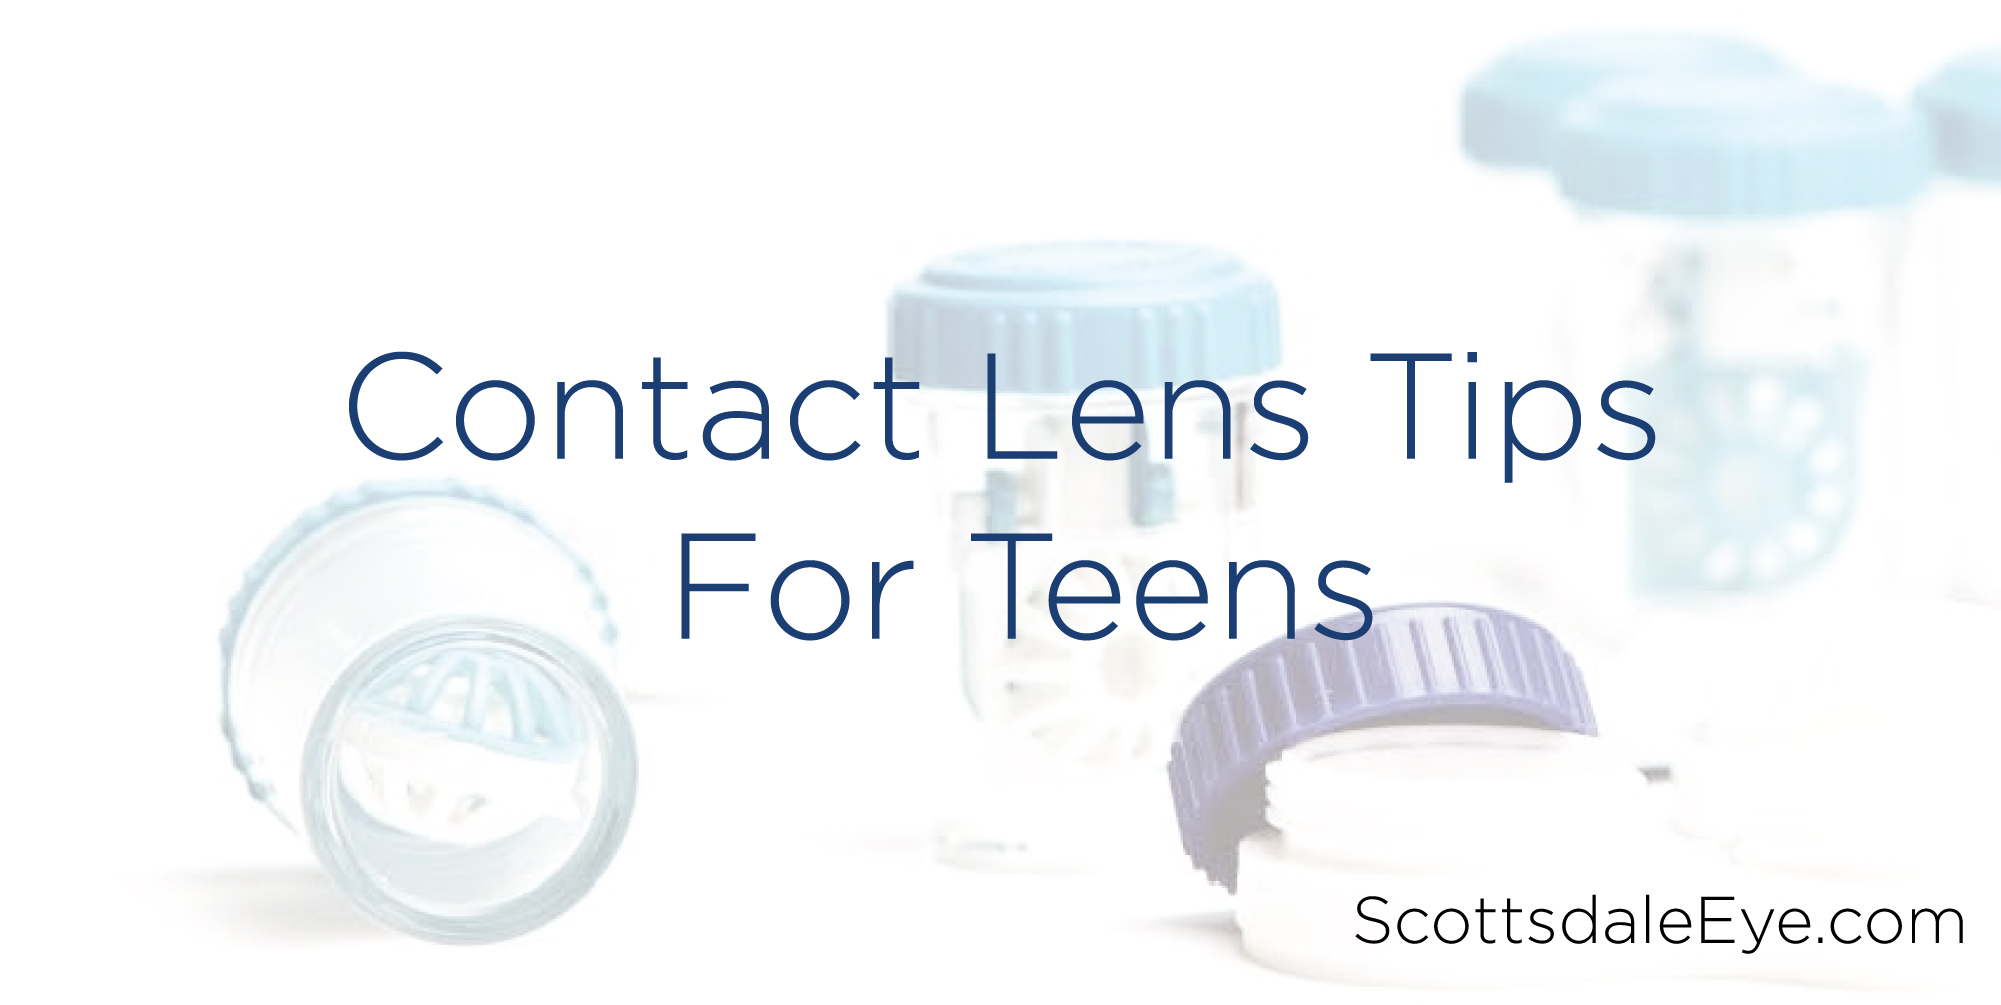 4 Simple Contact Lens Tips for Teens